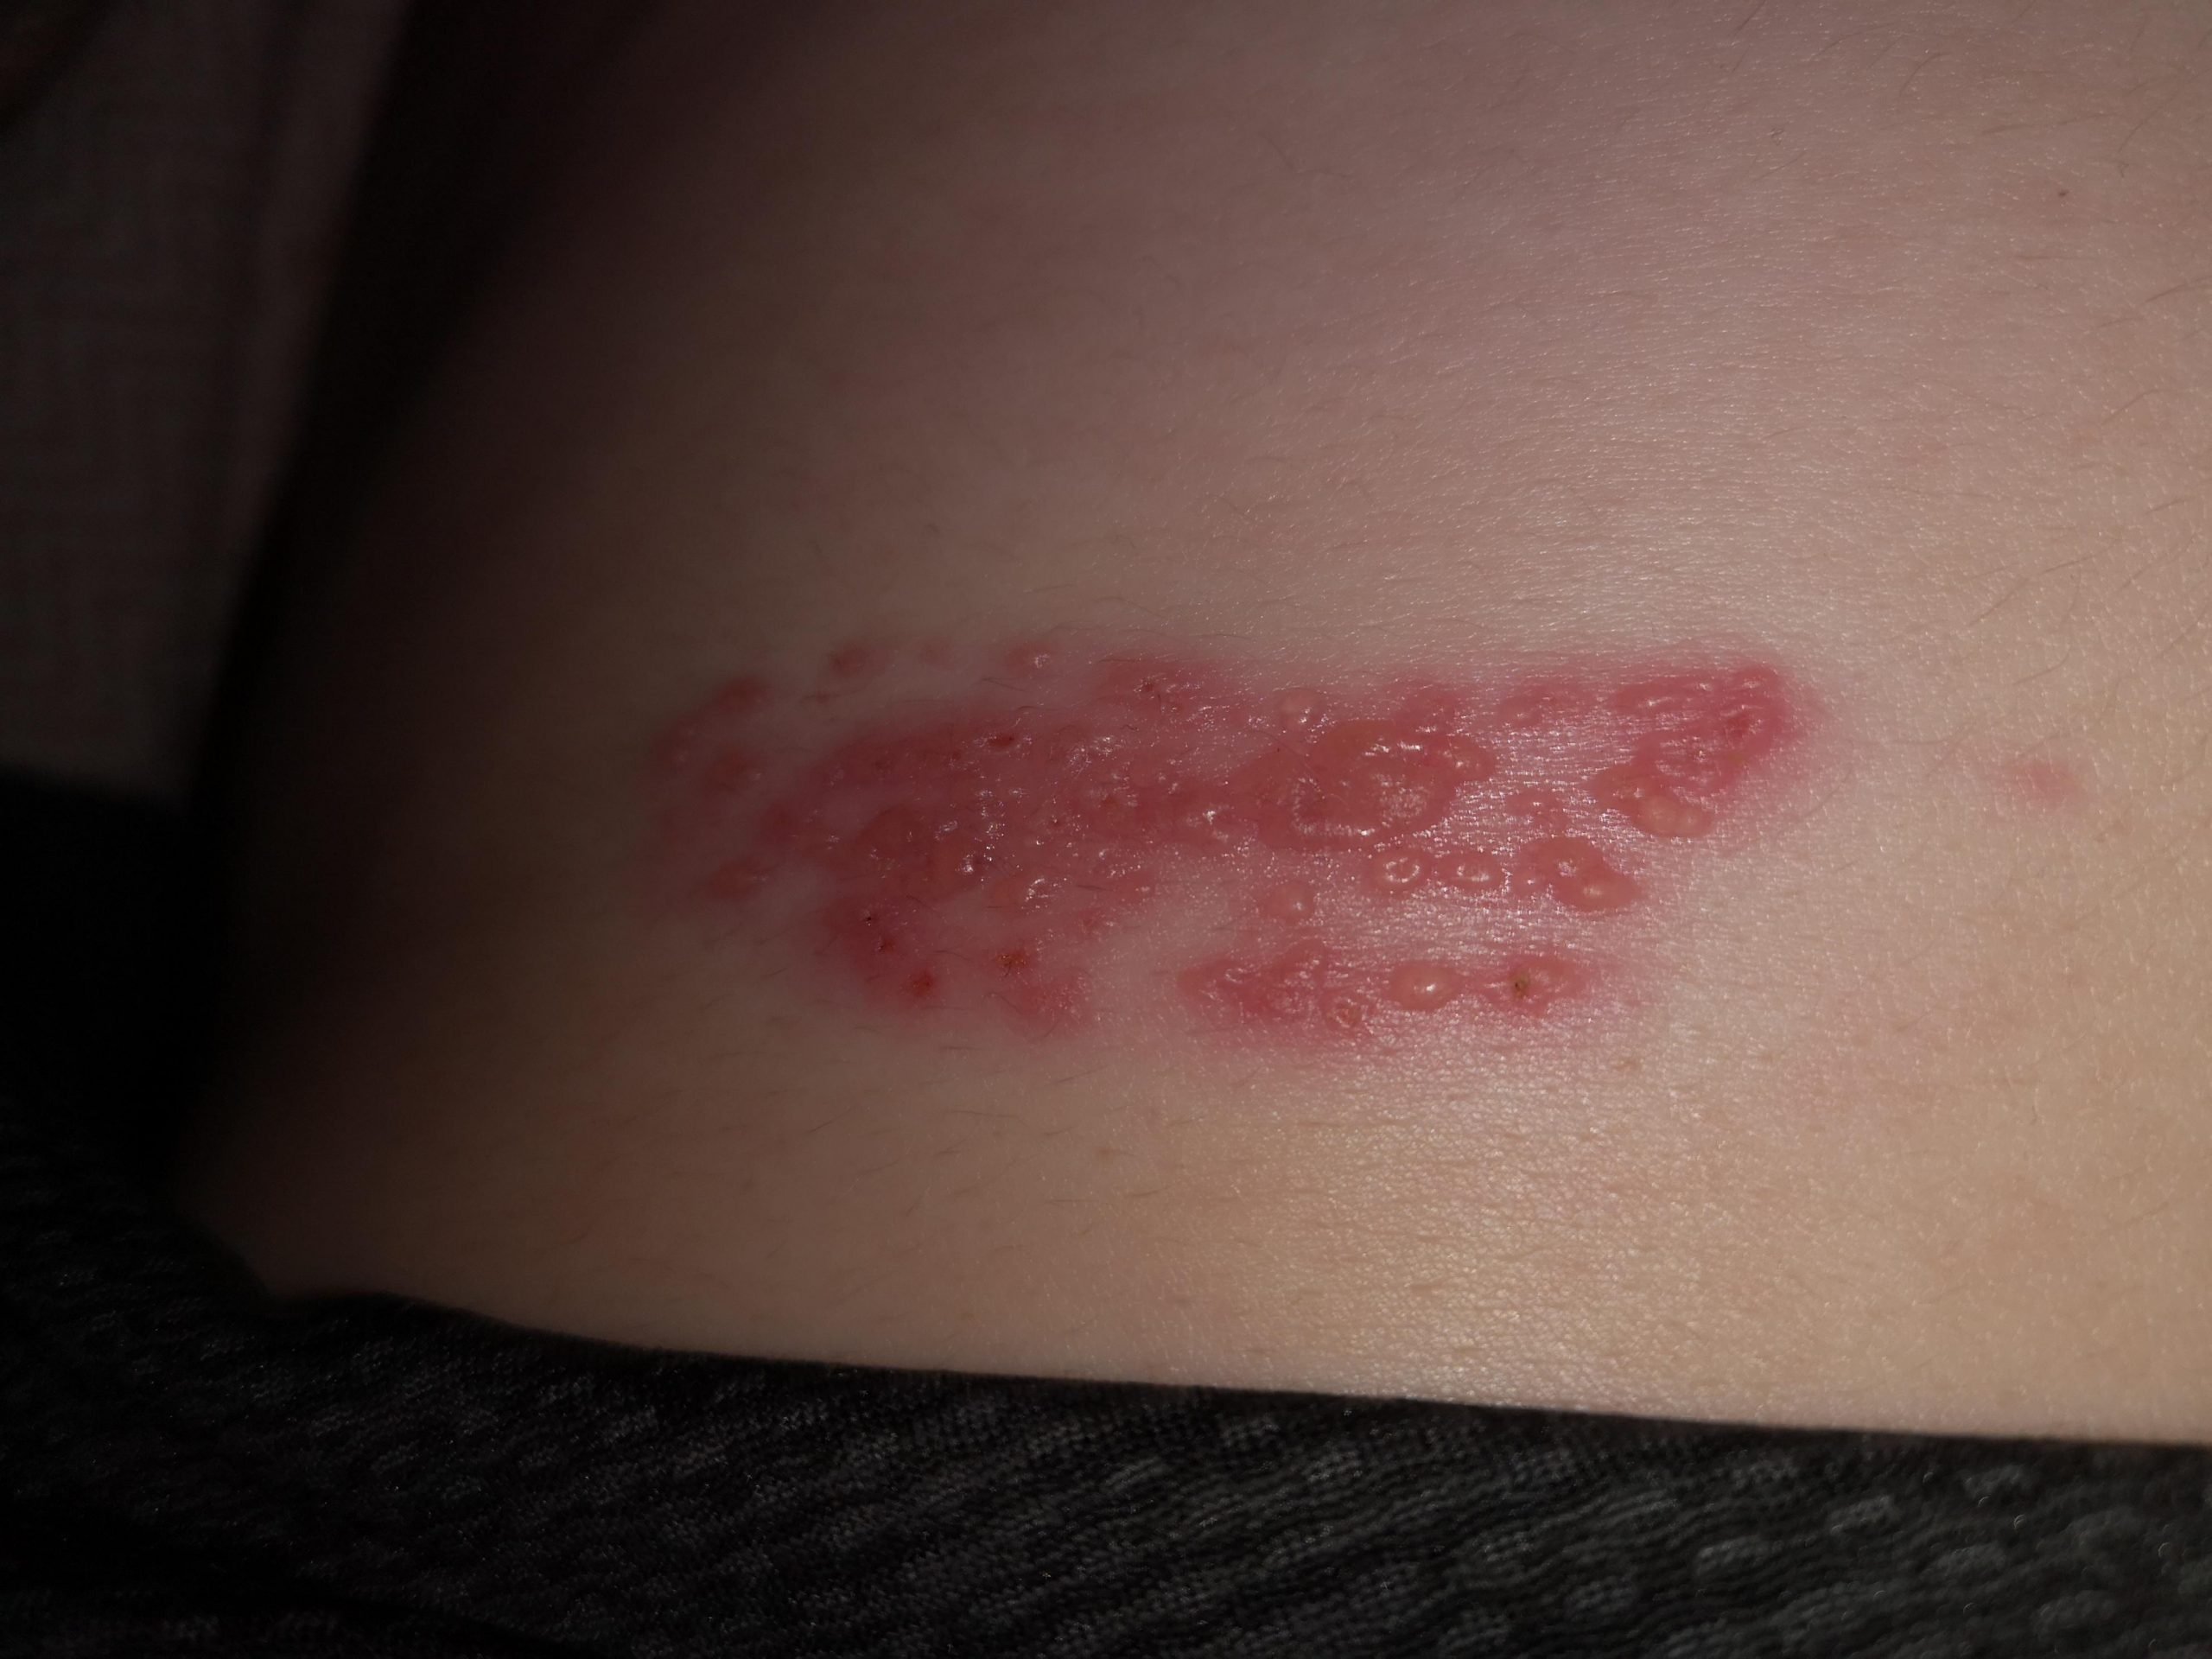 Does this look like shingles ?! I know asking medical advice on the ...